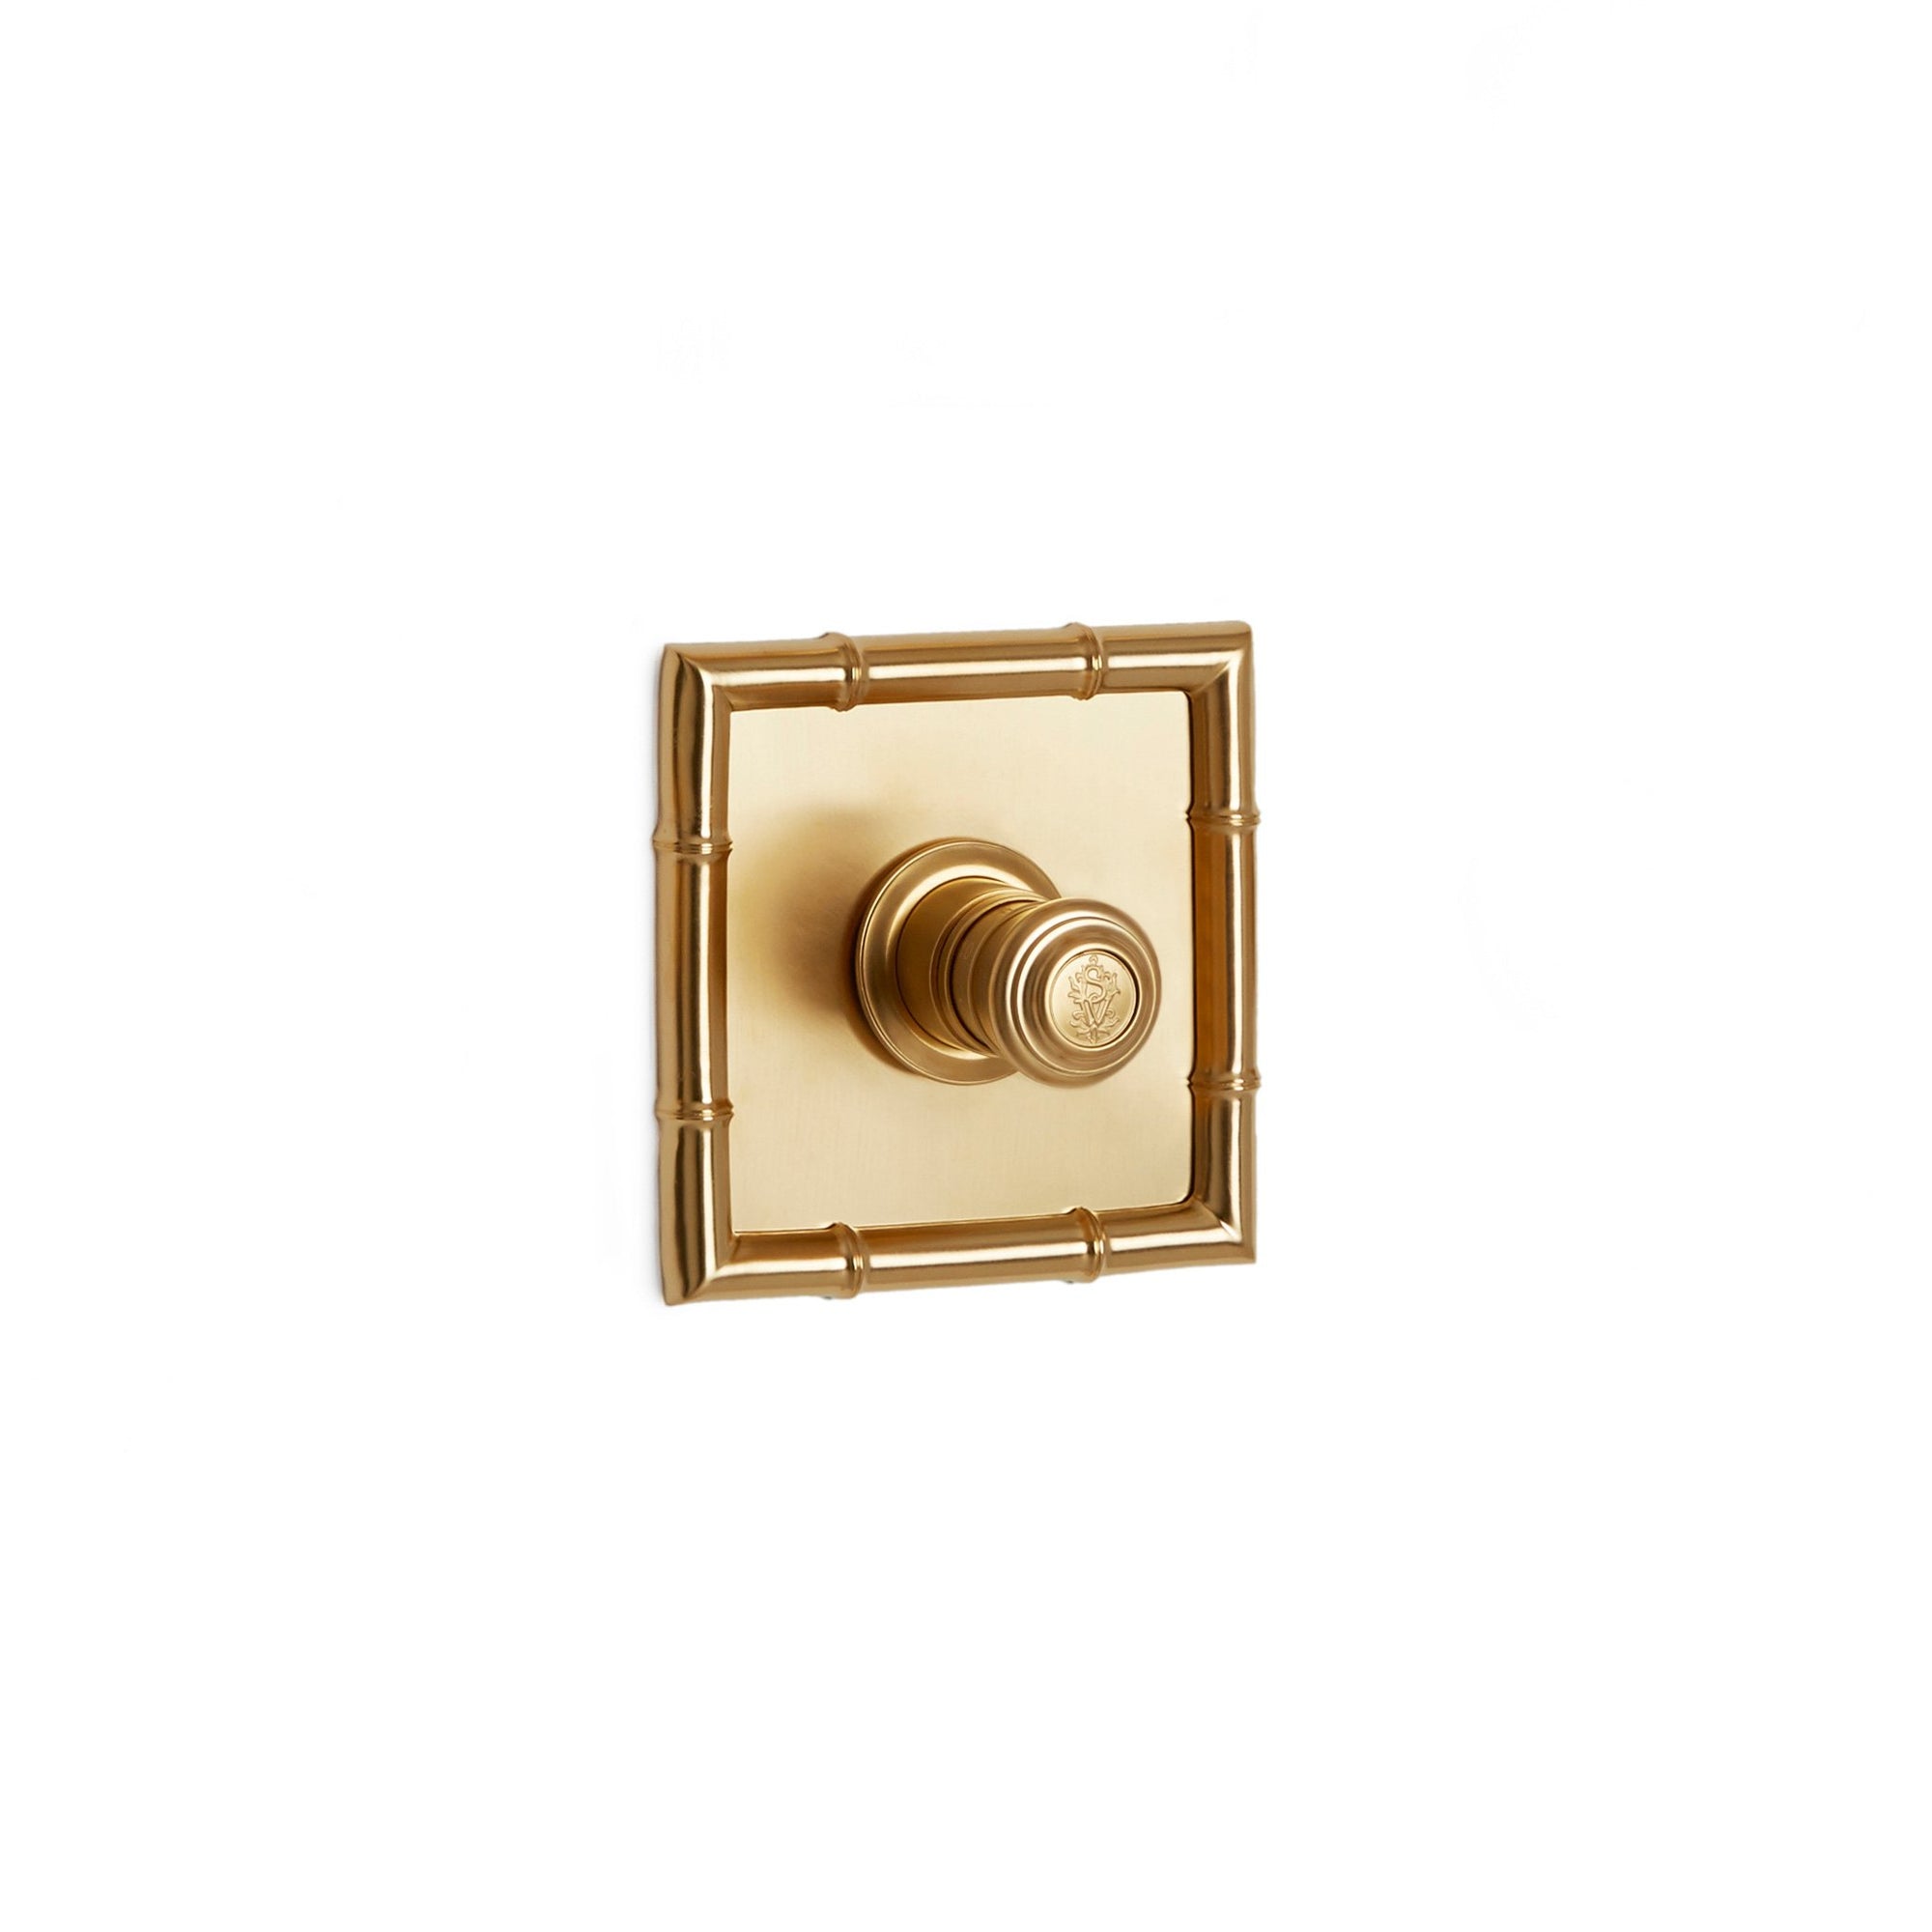 TMO05PL-LOGO-GP Sherle Wagner International Bamboo High Flow Thermostatic Trim in Gold Plate metal finish